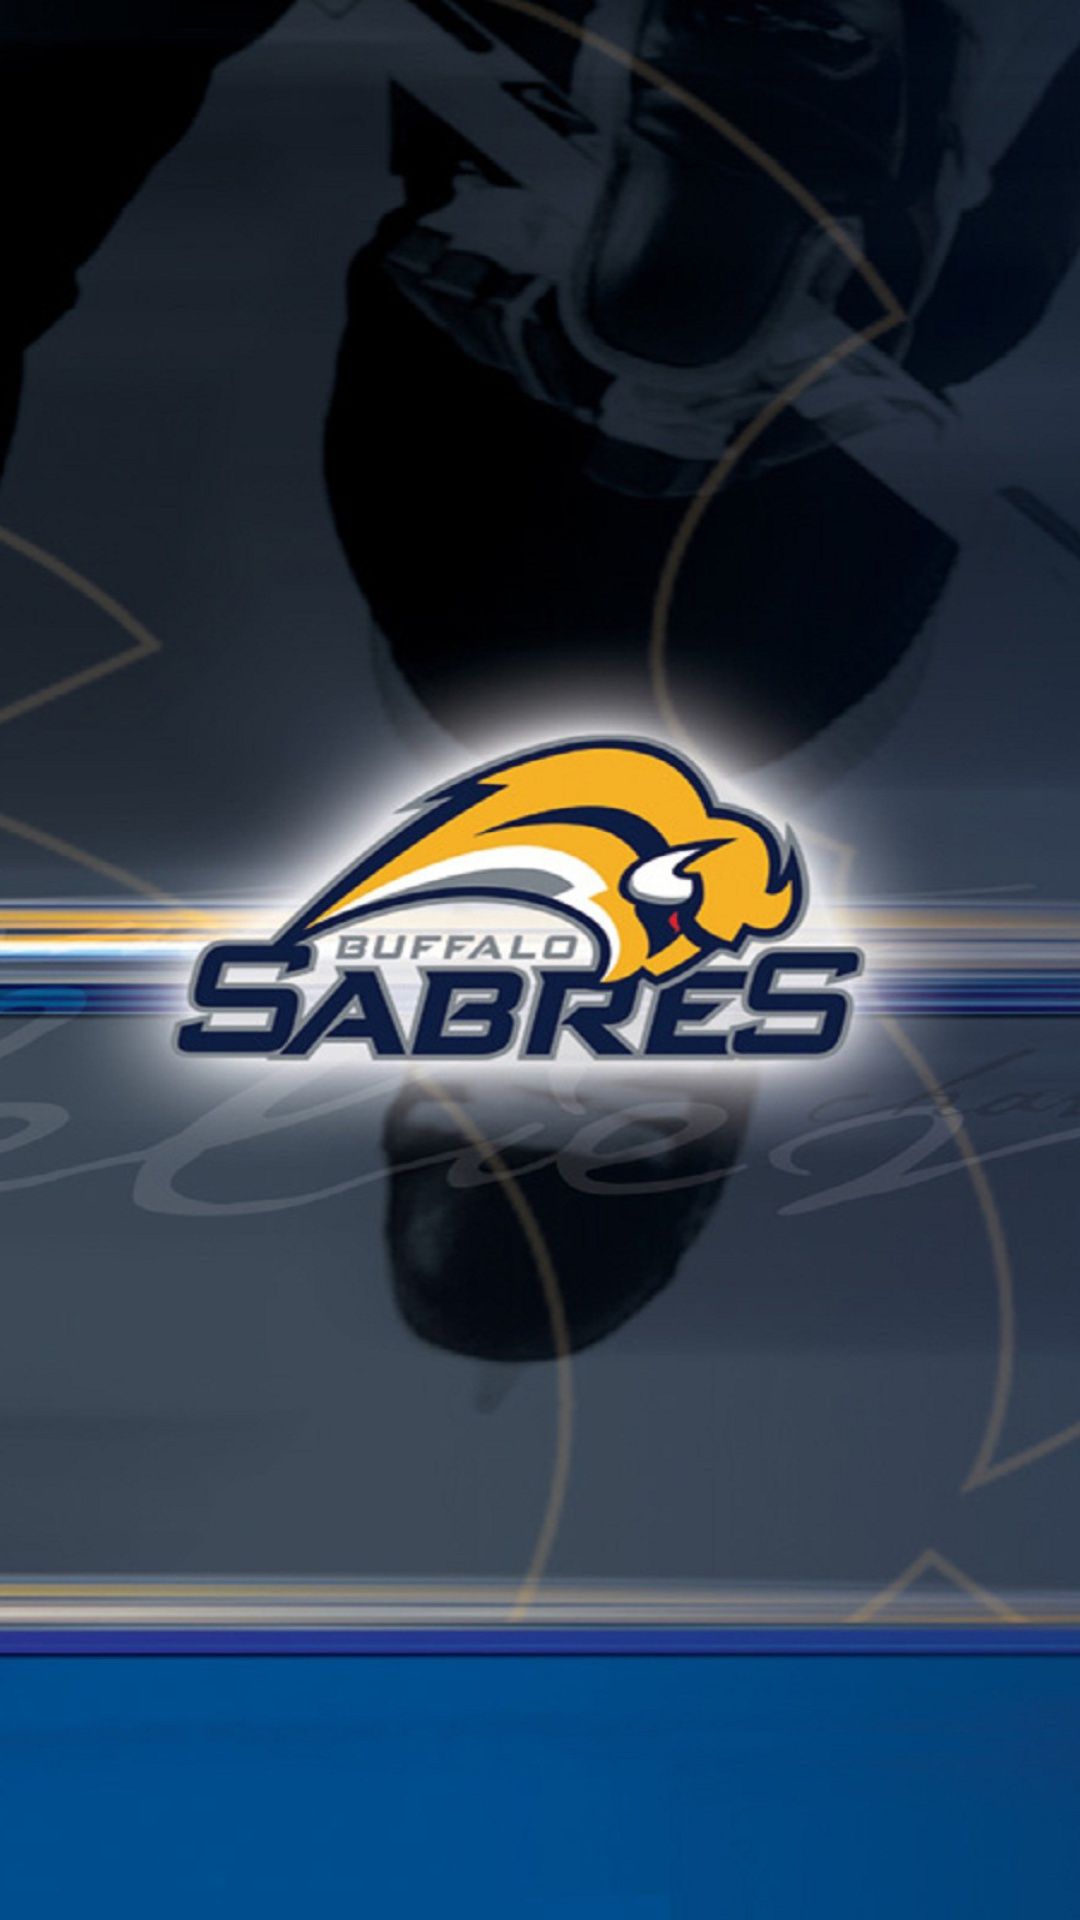 Buffalo Sabres wallpaper by EthG0109 - Download on ZEDGE™, fa29